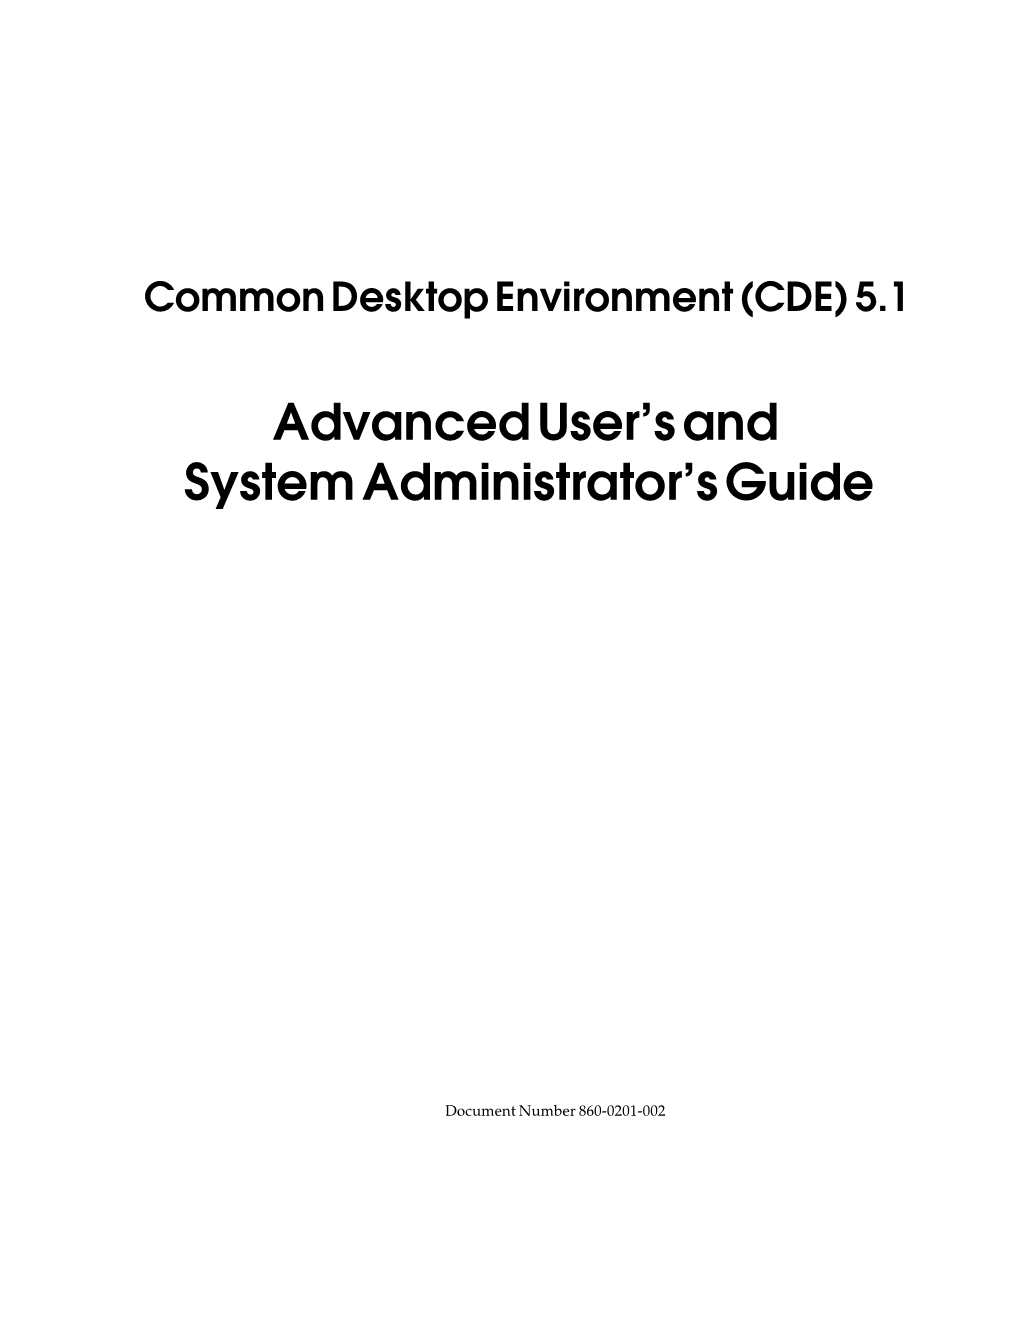 Advanced User's and System Administrator's Guide Document Number 860-0201-002 Contents